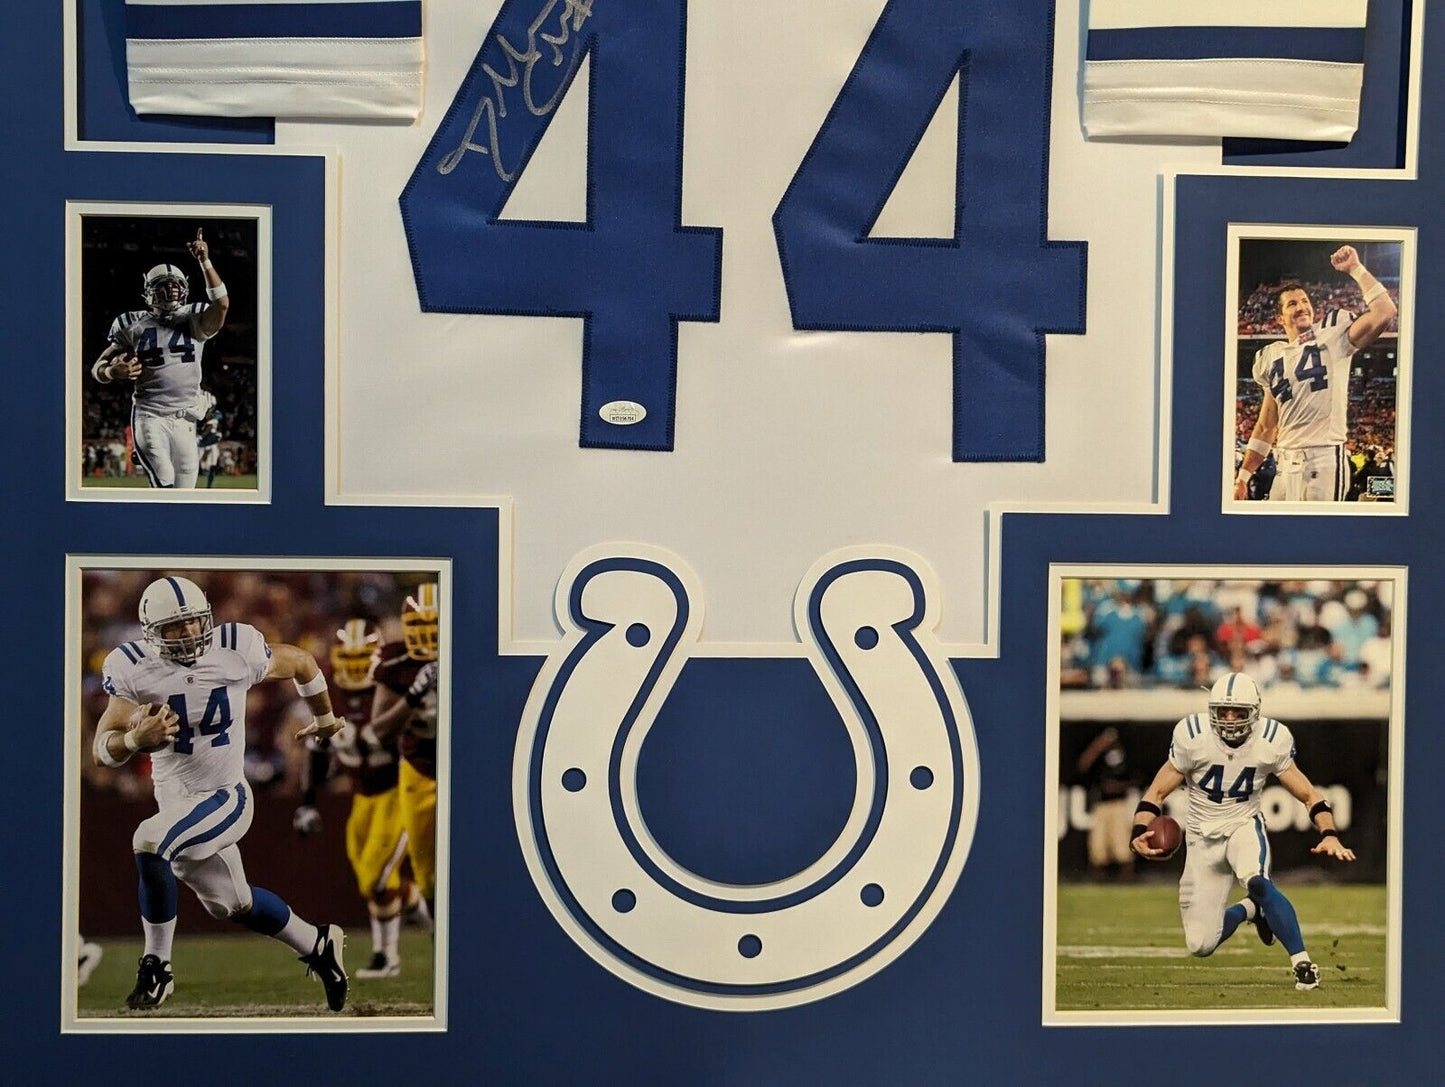 MVP Authentics Framed Indianapolis Colts Dallas Clark Autographed Signed Jersey Jsa Coa 405 sports jersey framing , jersey framing